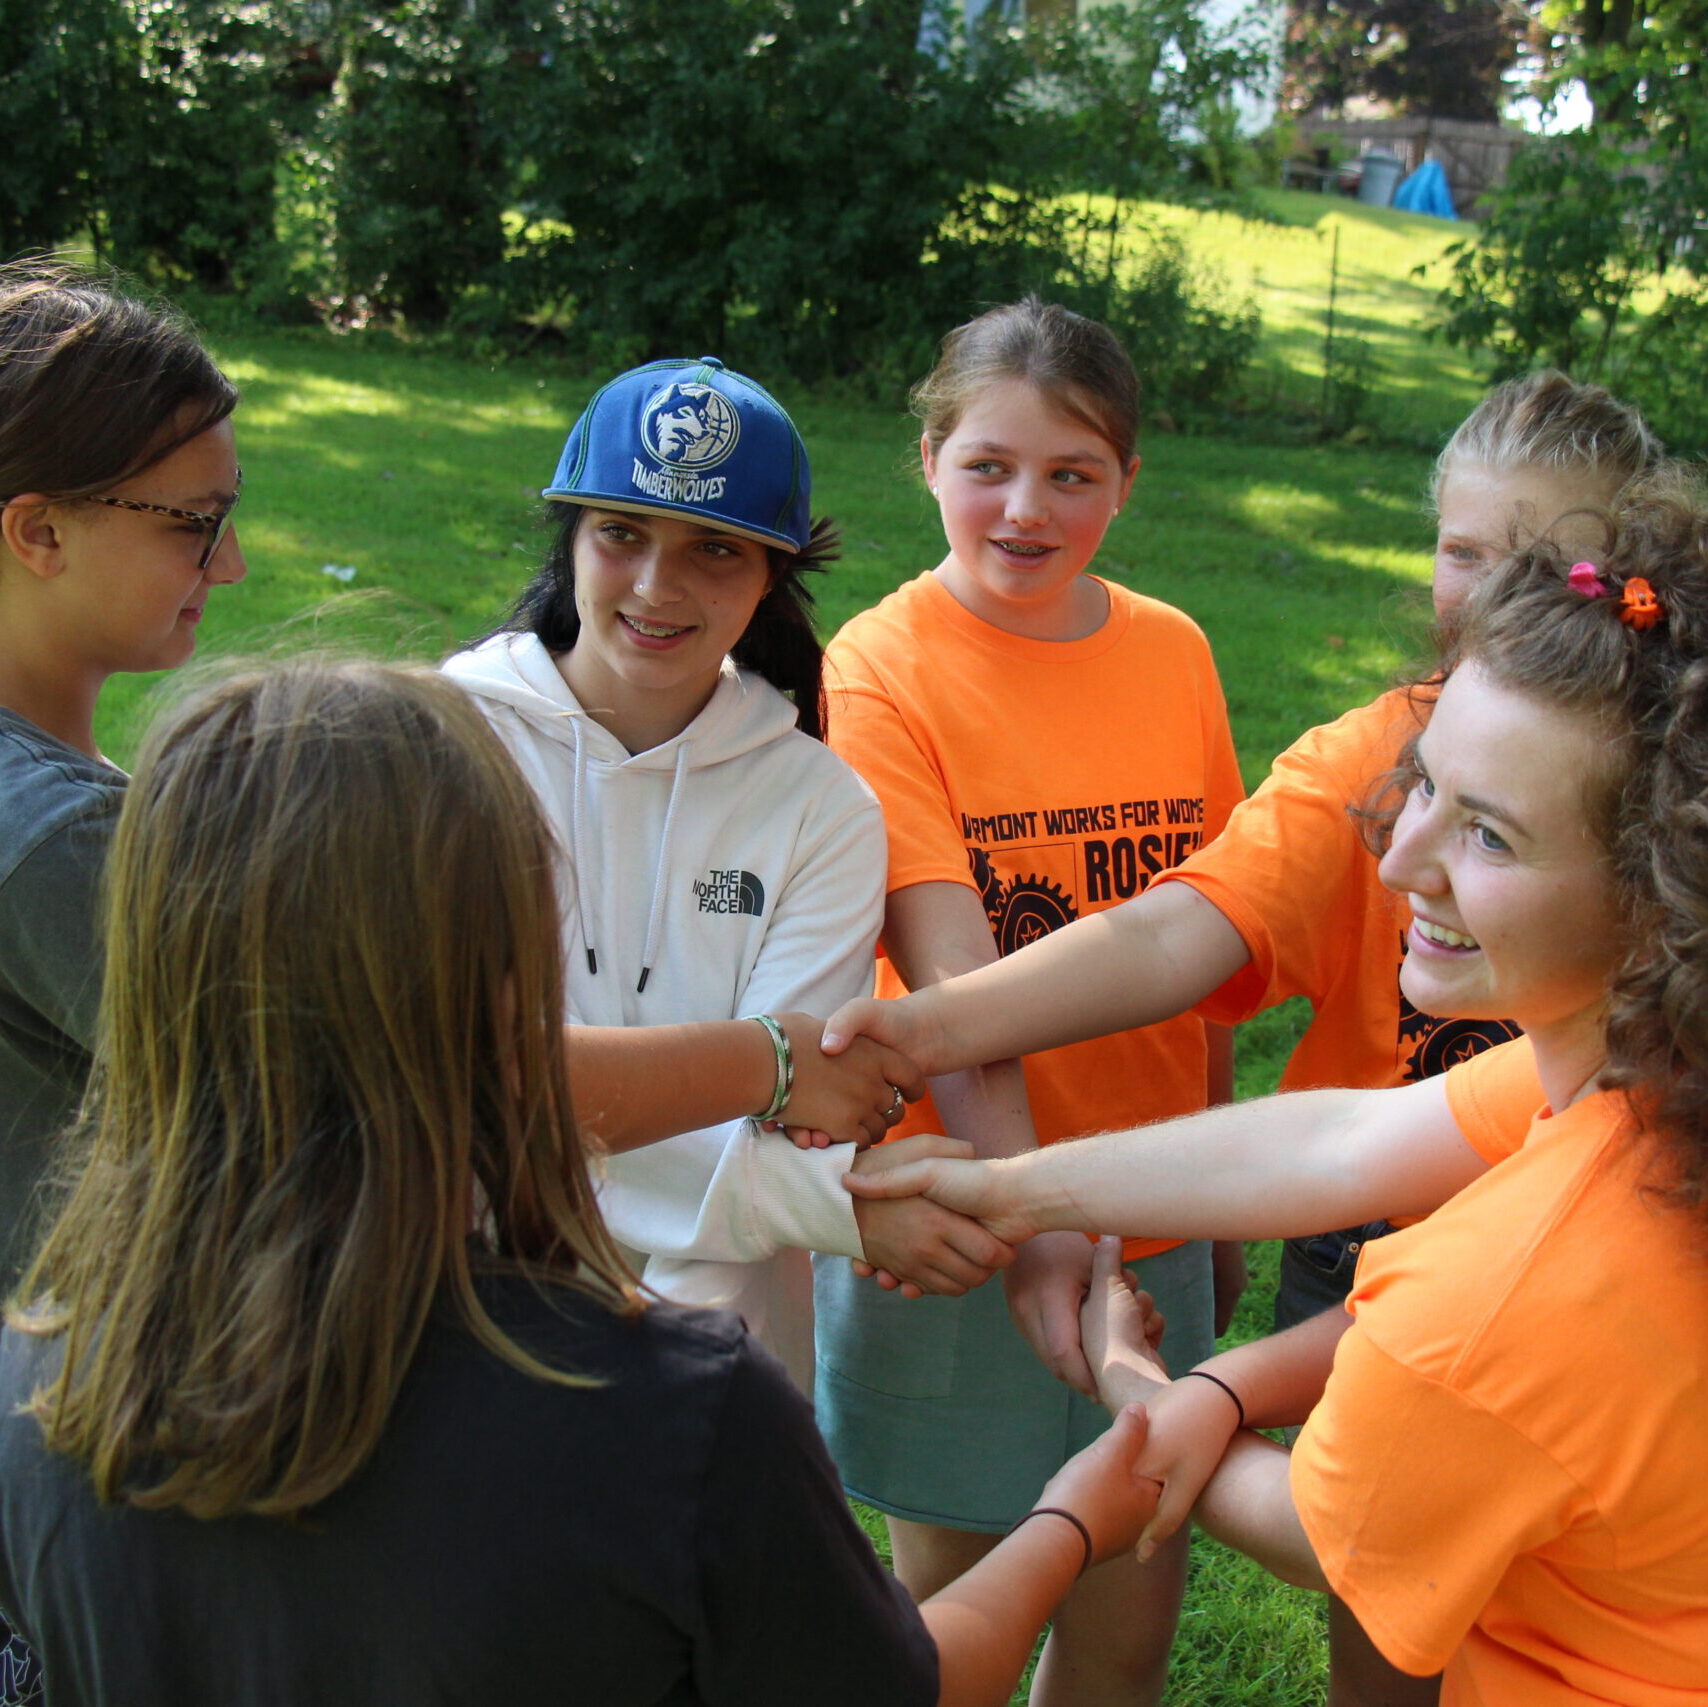 Rosie's Girls campers play a game outside holding hands at summer camp.